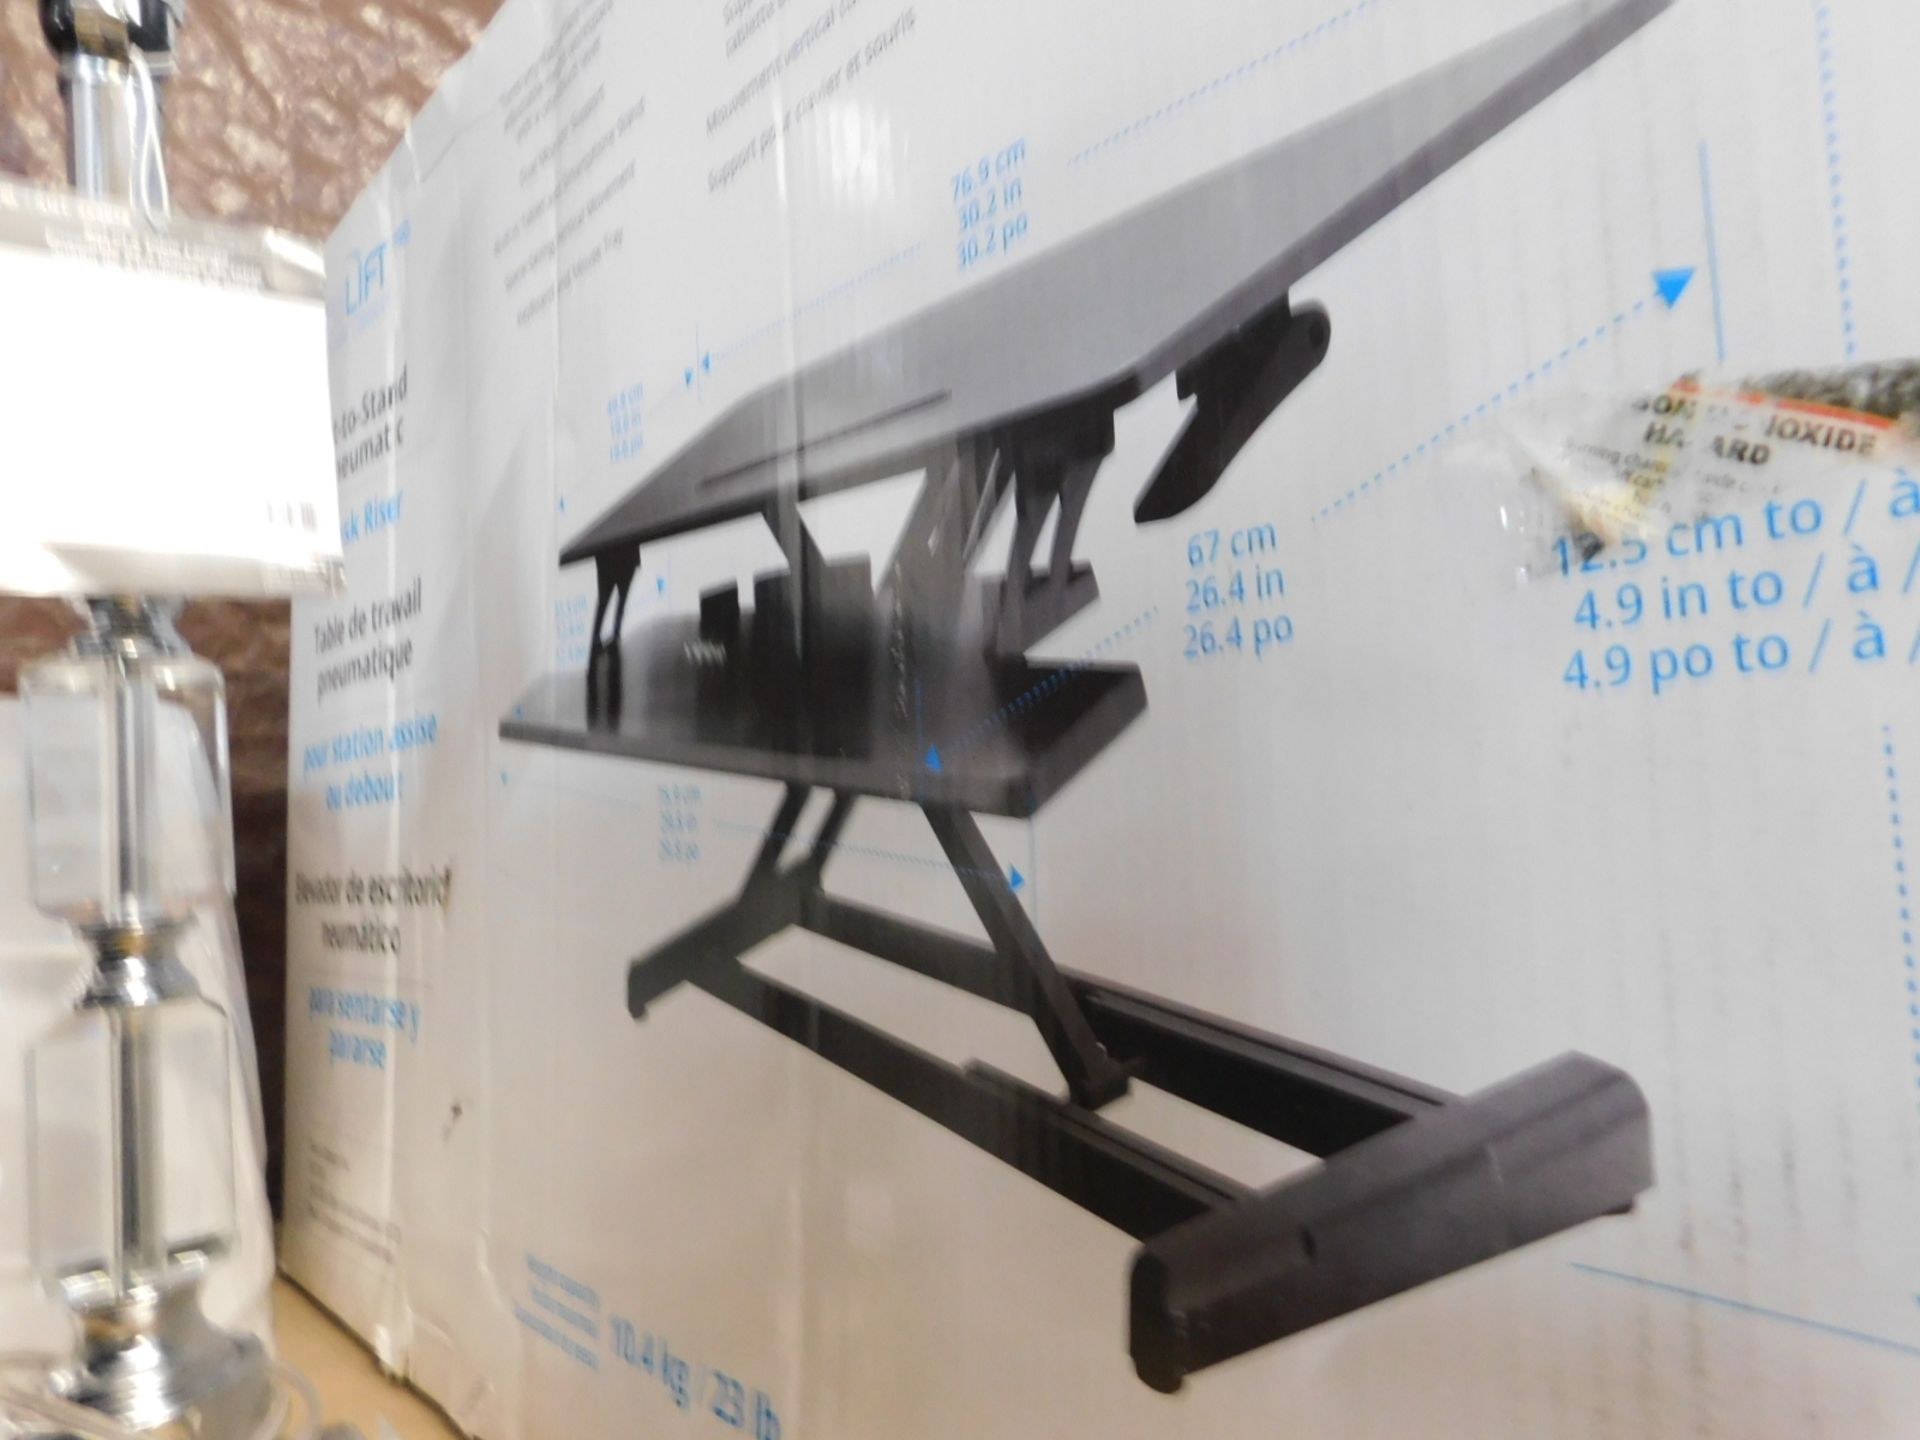 1 BOXED SEVILLE CLASSICS AIRLIFT PRO PNEUMATIC SIT-TO-STAND DESK RISER RRP Â£99.99